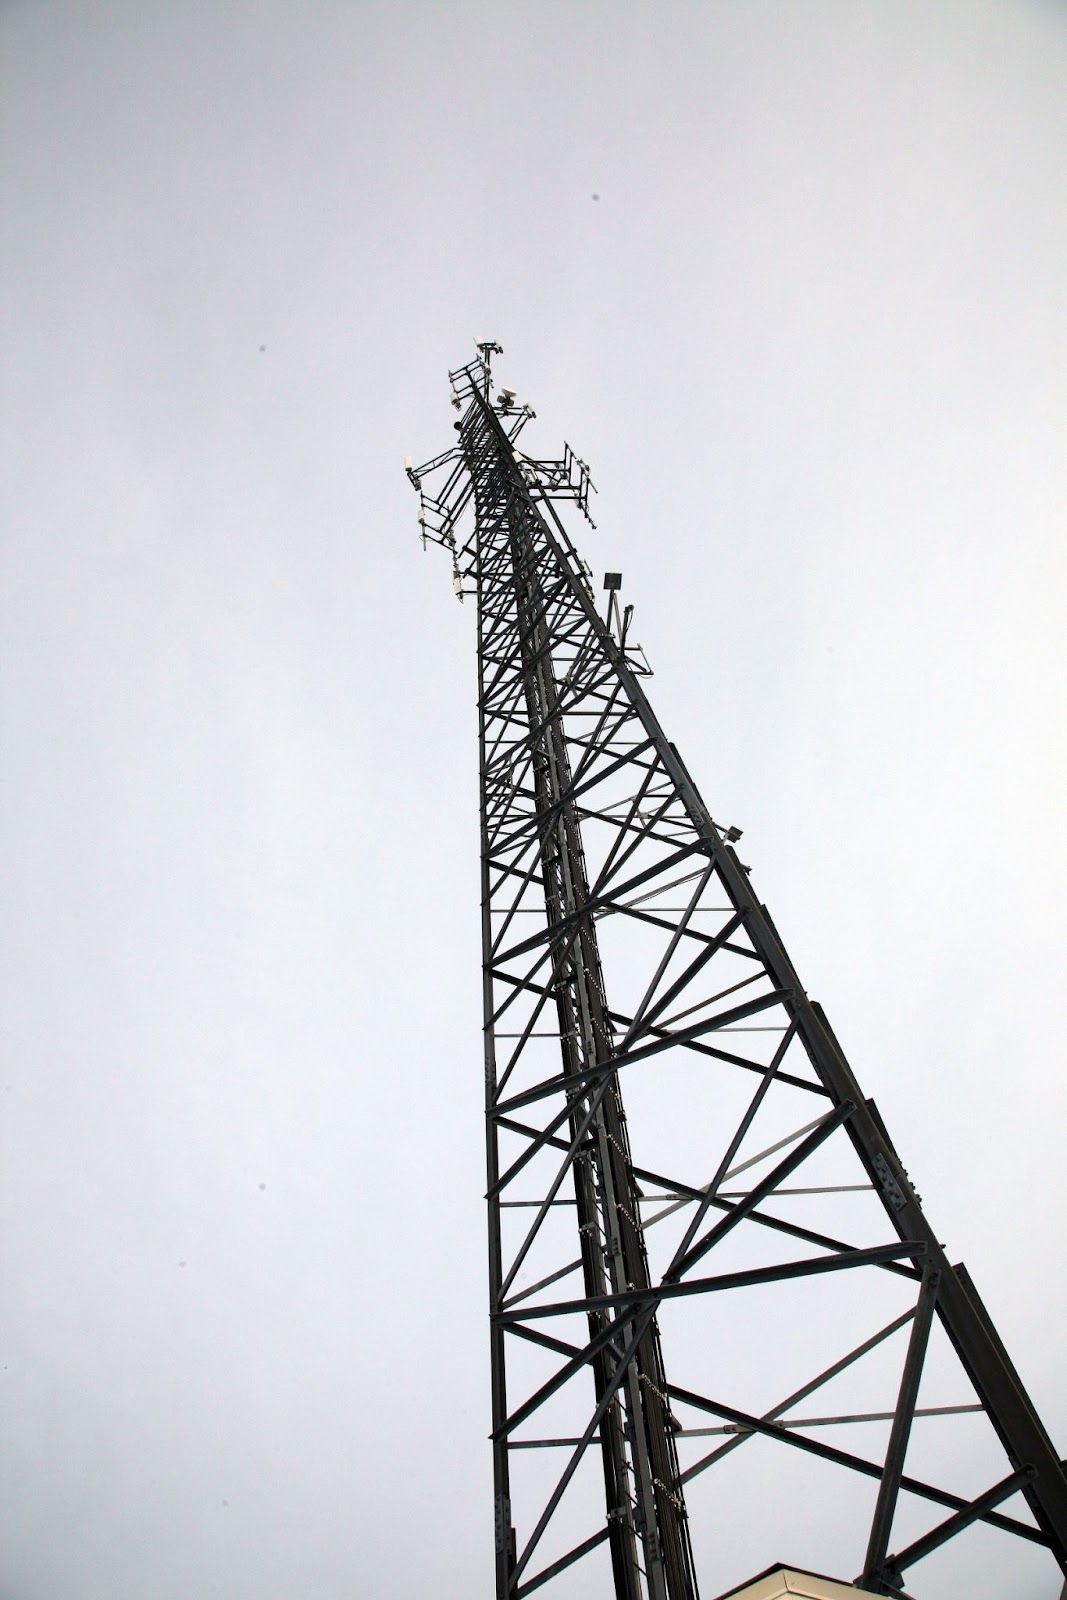 Tower technicians are in high demand